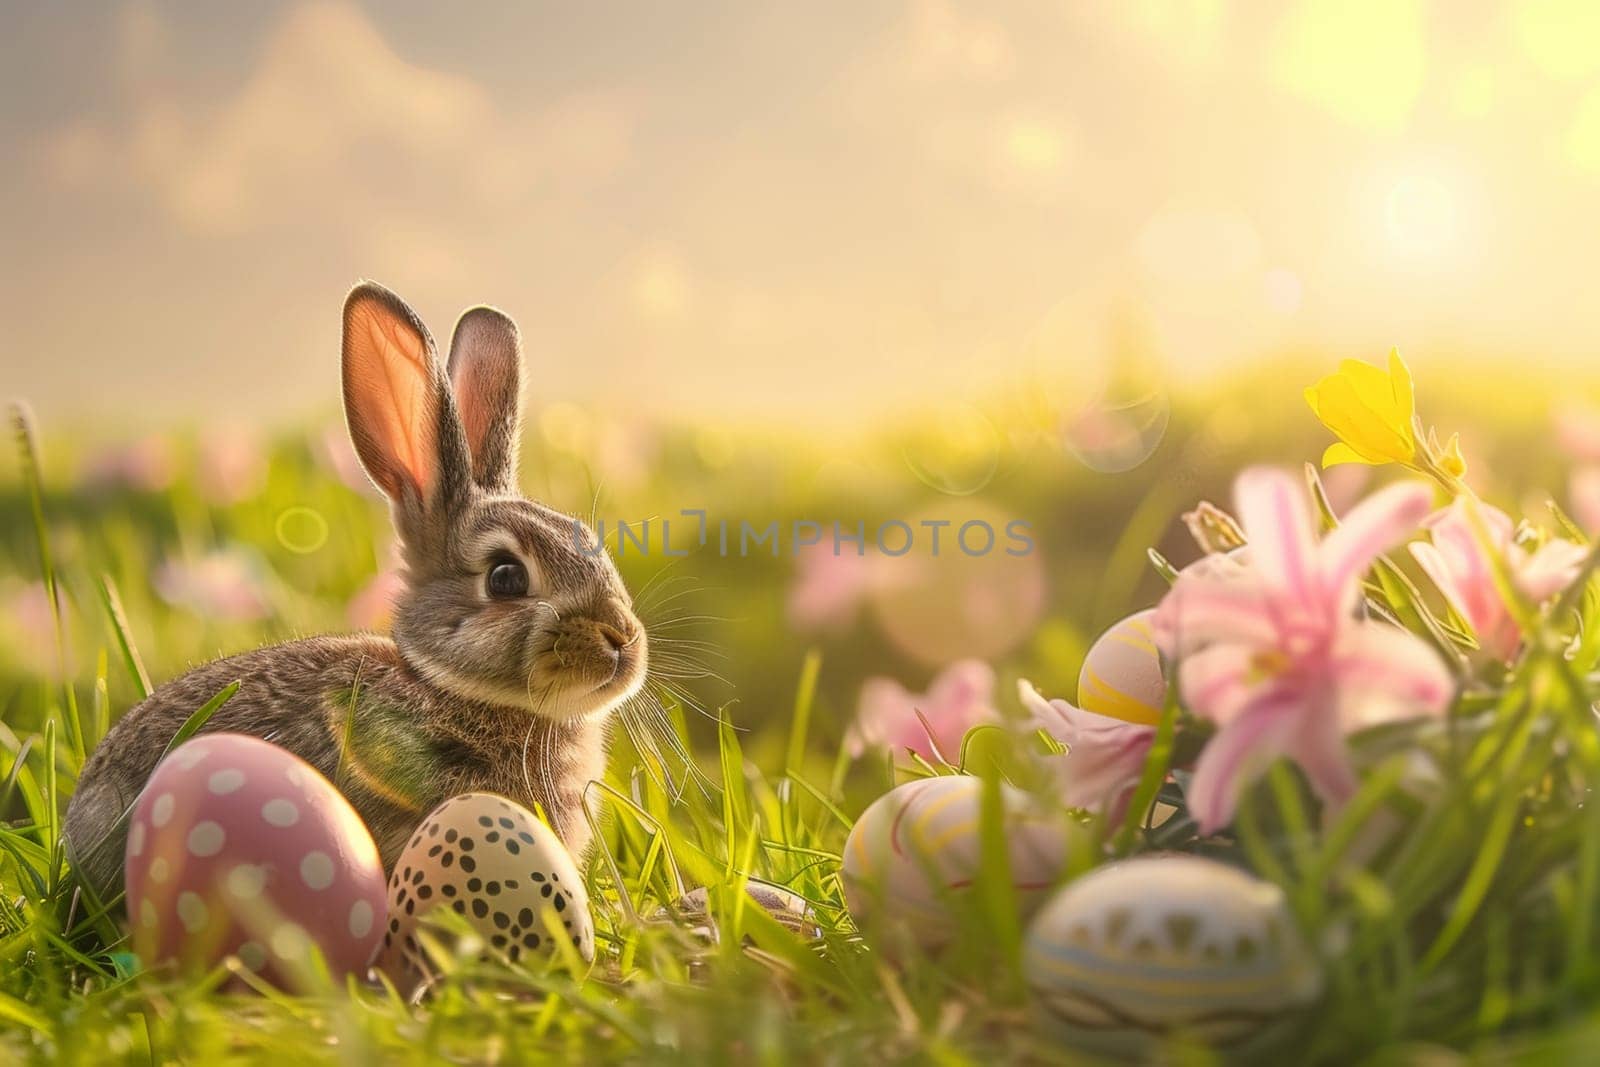 A rabbit is sitting in a field of flowers and eggs by nateemee